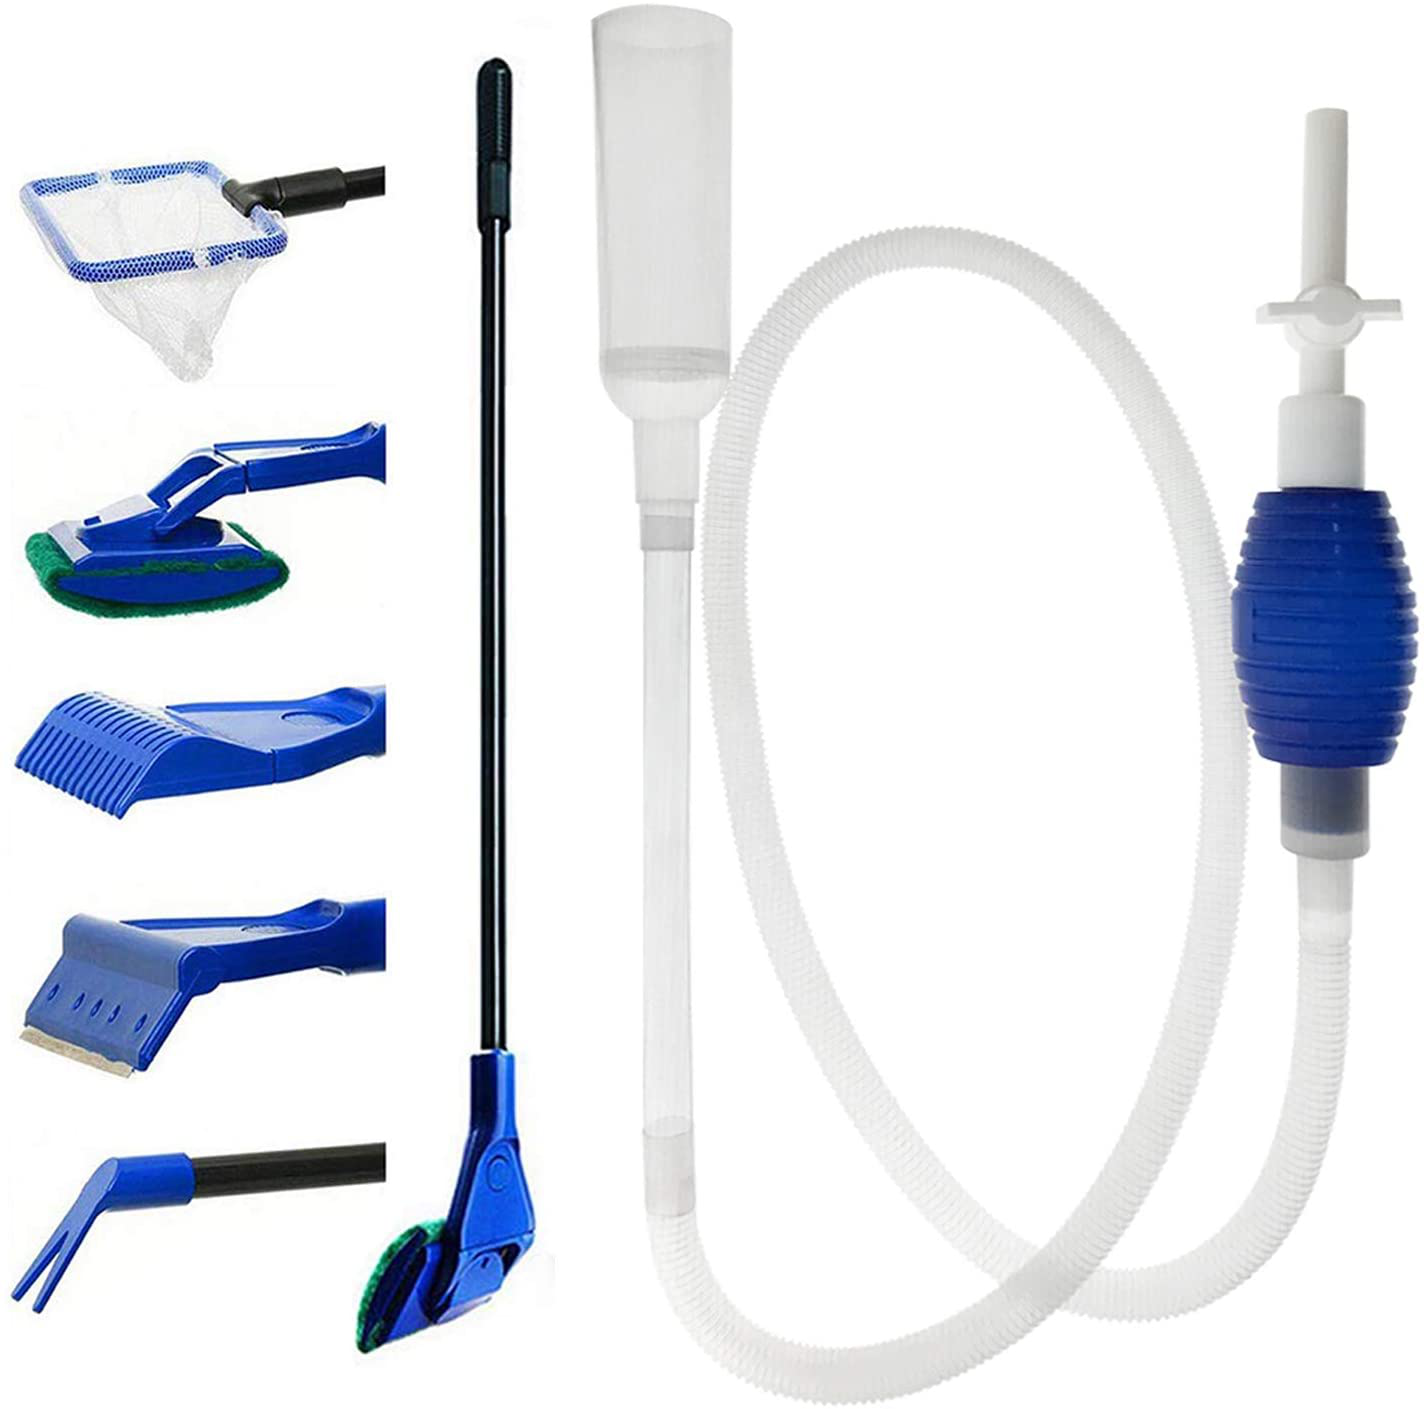 Greenjoy Aquarium Fish Tank Cleaning Kit Tools Algae Scrapers Set 5 in 1 & Fish Tank Gravel Cleaner - Siphon Vacuum for Water Changing and Sand Cleaner (Cleaner Set)